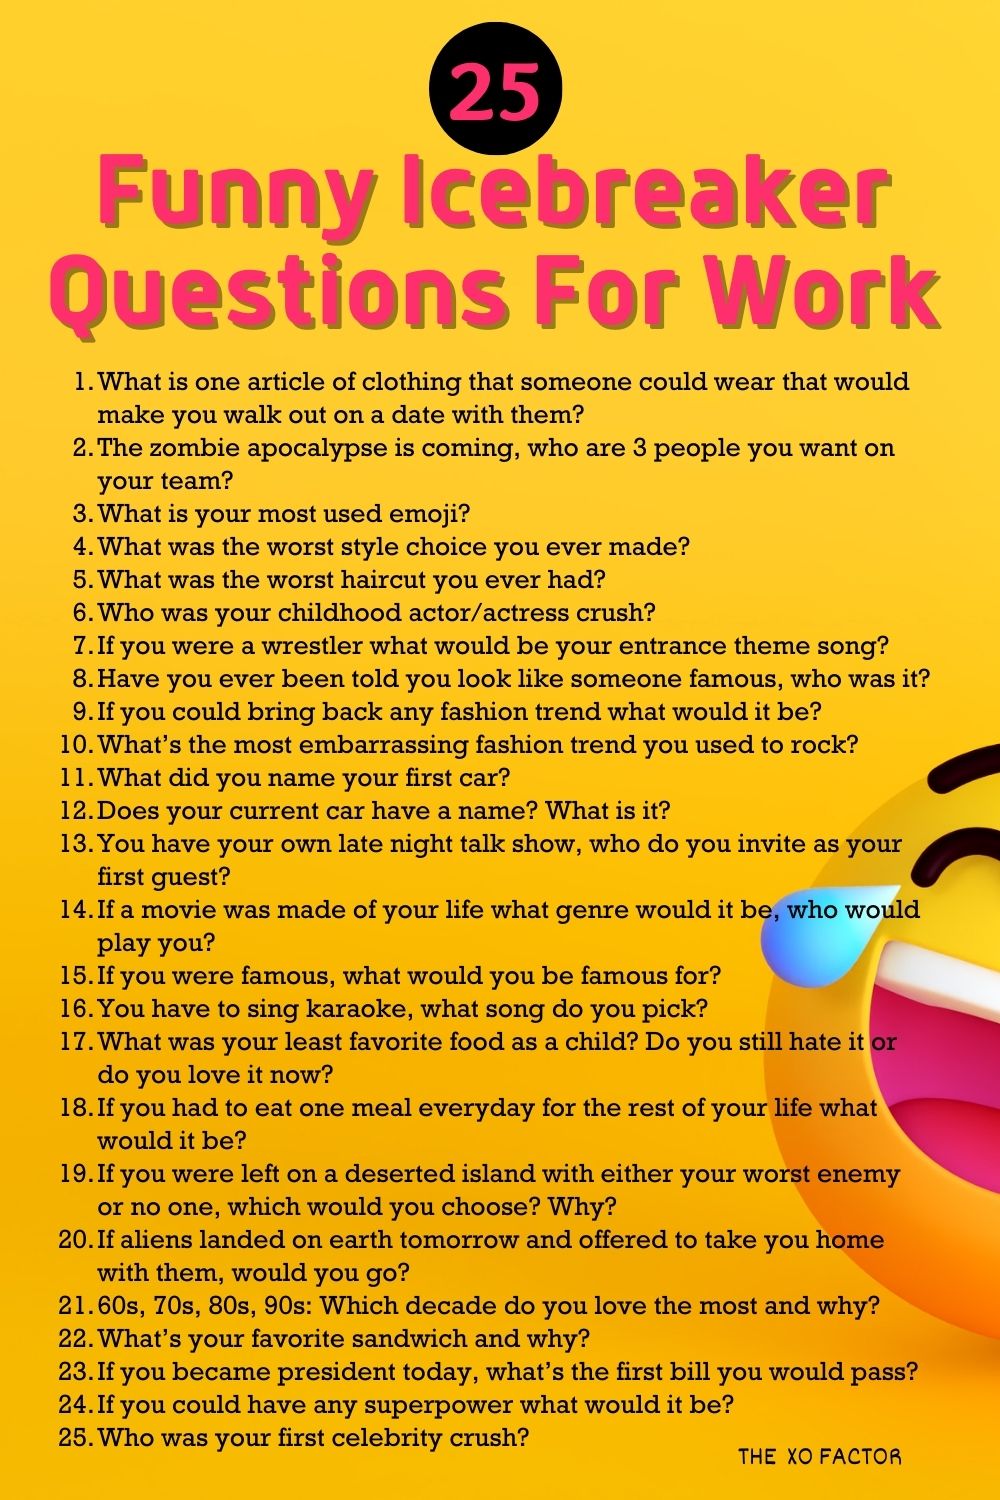 Funny Icebreaker Questions For Work